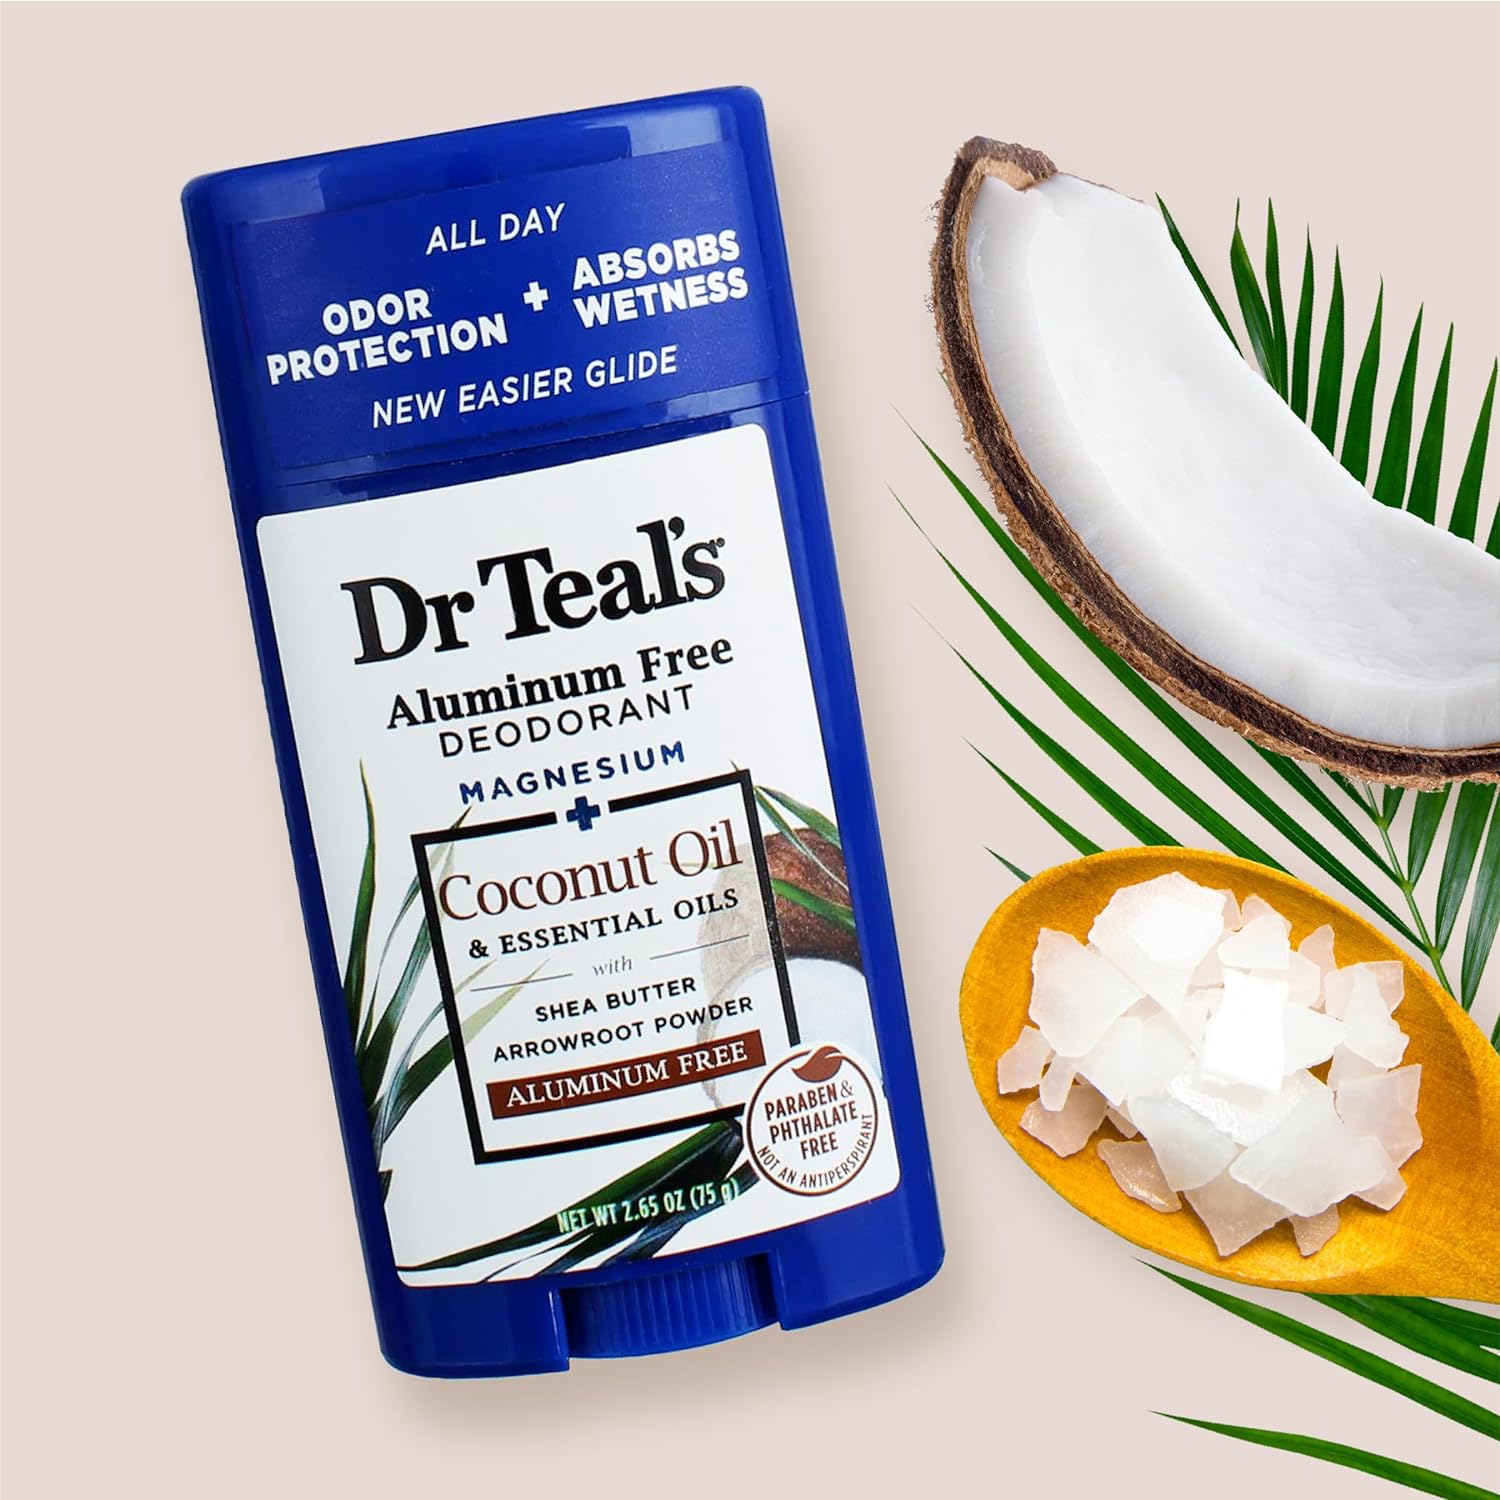 Dr Teal's Aluminum Free Deodorant, Coconut Oil with Essential Oils, 2.65 oz (Pack of 3) : Beauty & Personal Care